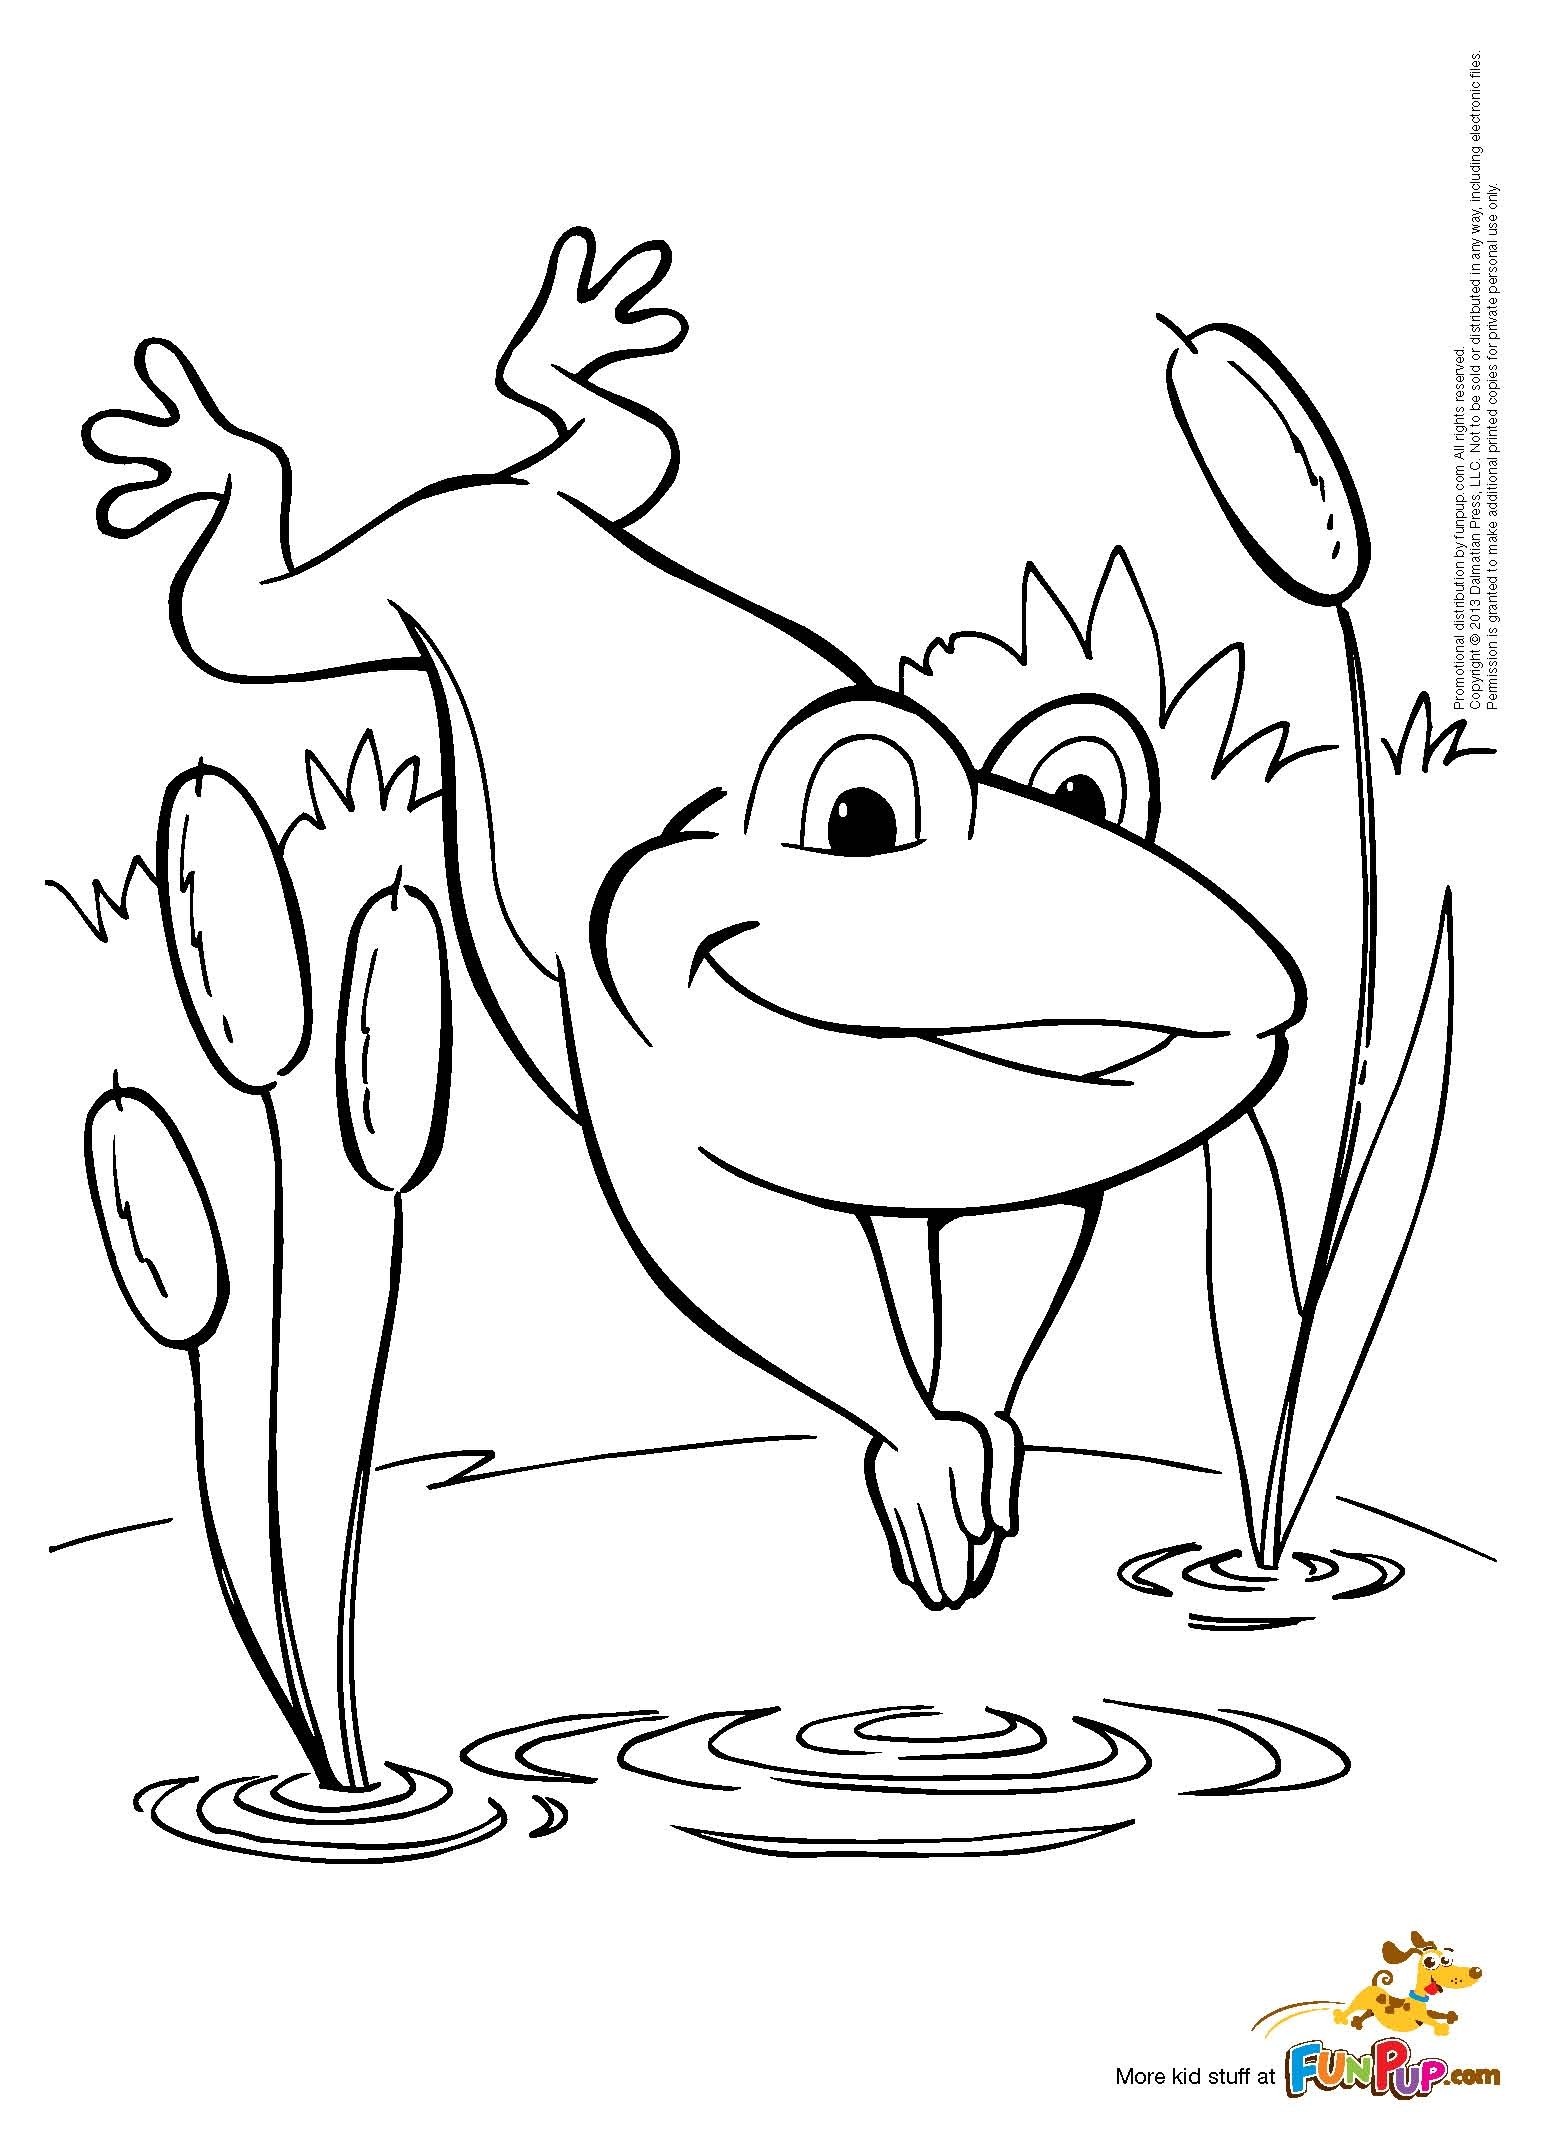 jumping-child-coloring-page-coloring-pages